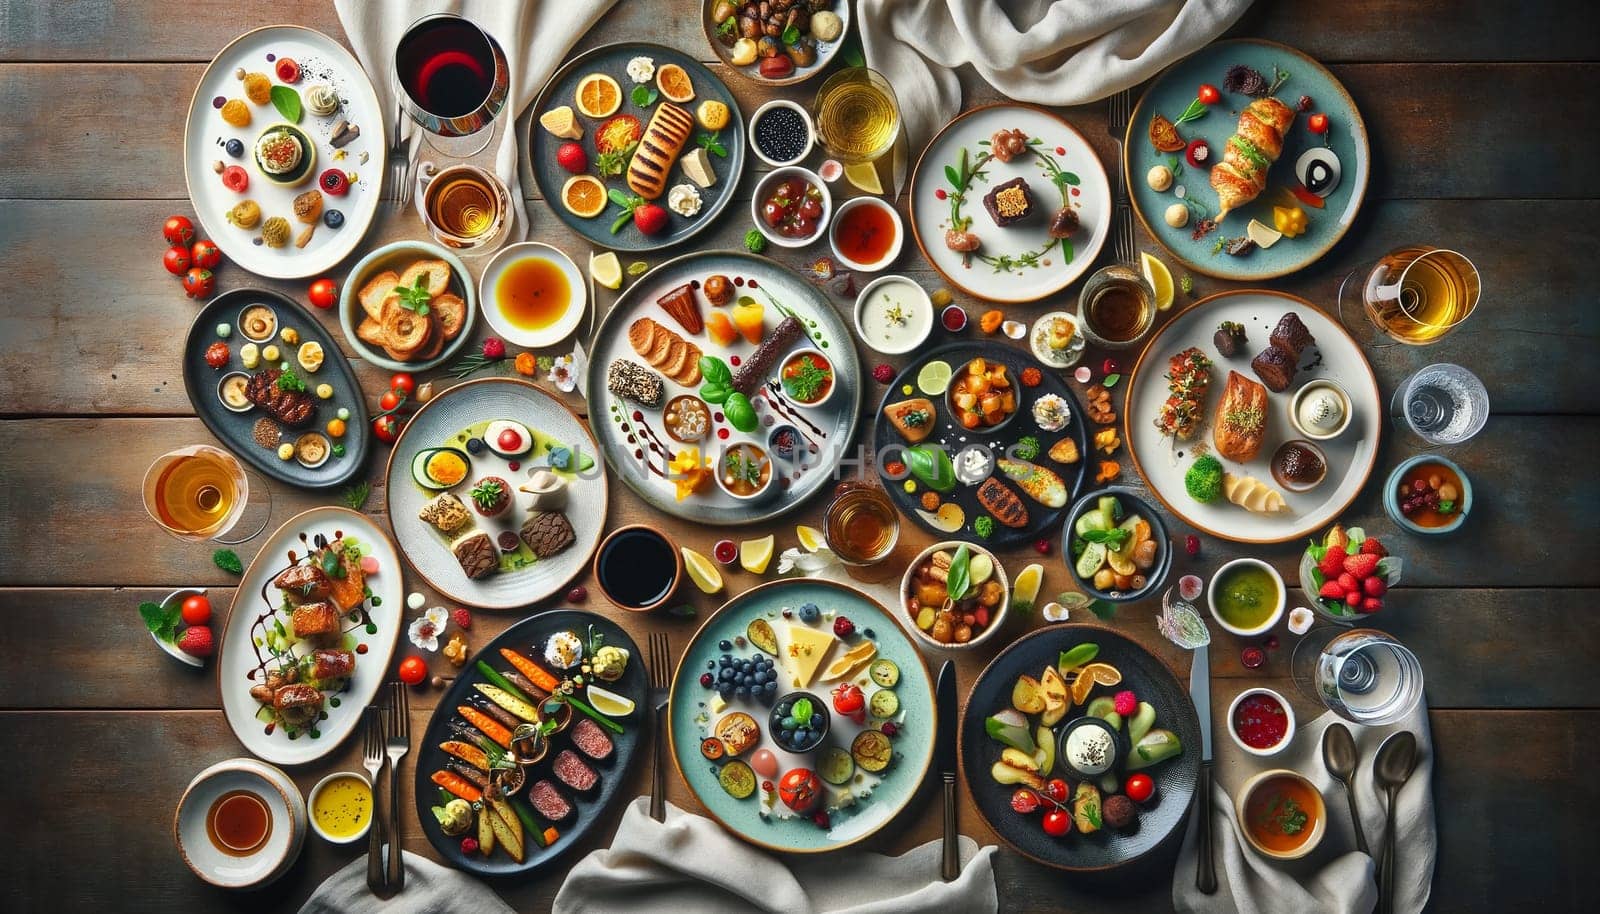 Array of Gourmet Dishes: Appetizers, Main Courses, Desserts, and Beverages. High quality illustration